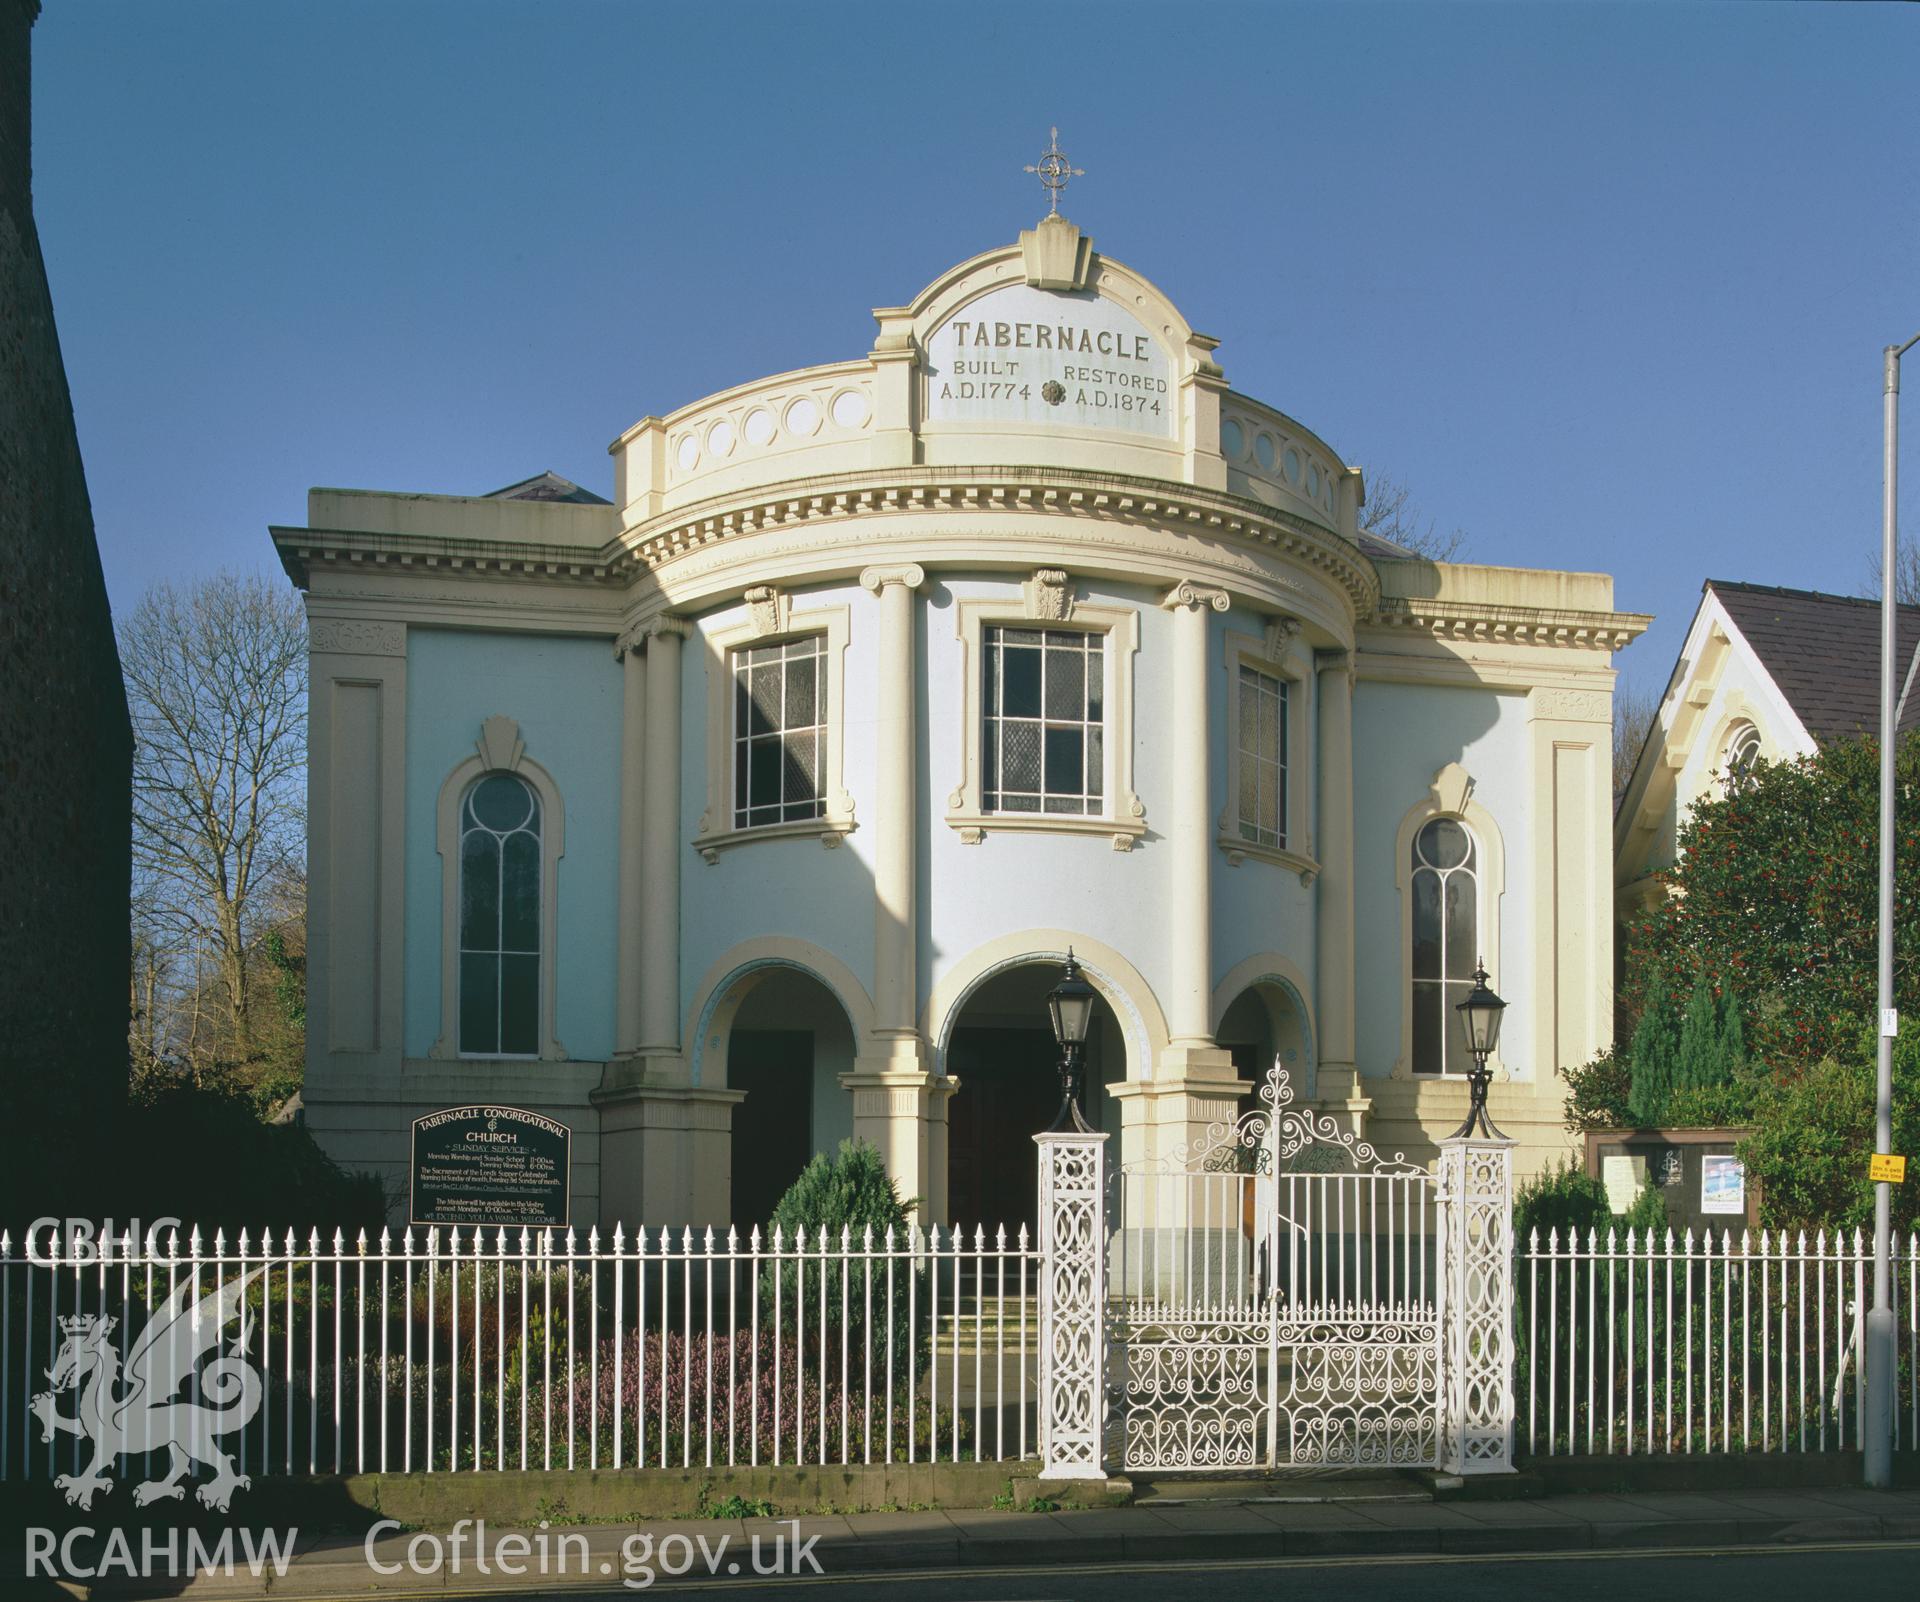 RCAHMW colour transparency showing an exterior view of Capel Tabernacle, Haverfordwest